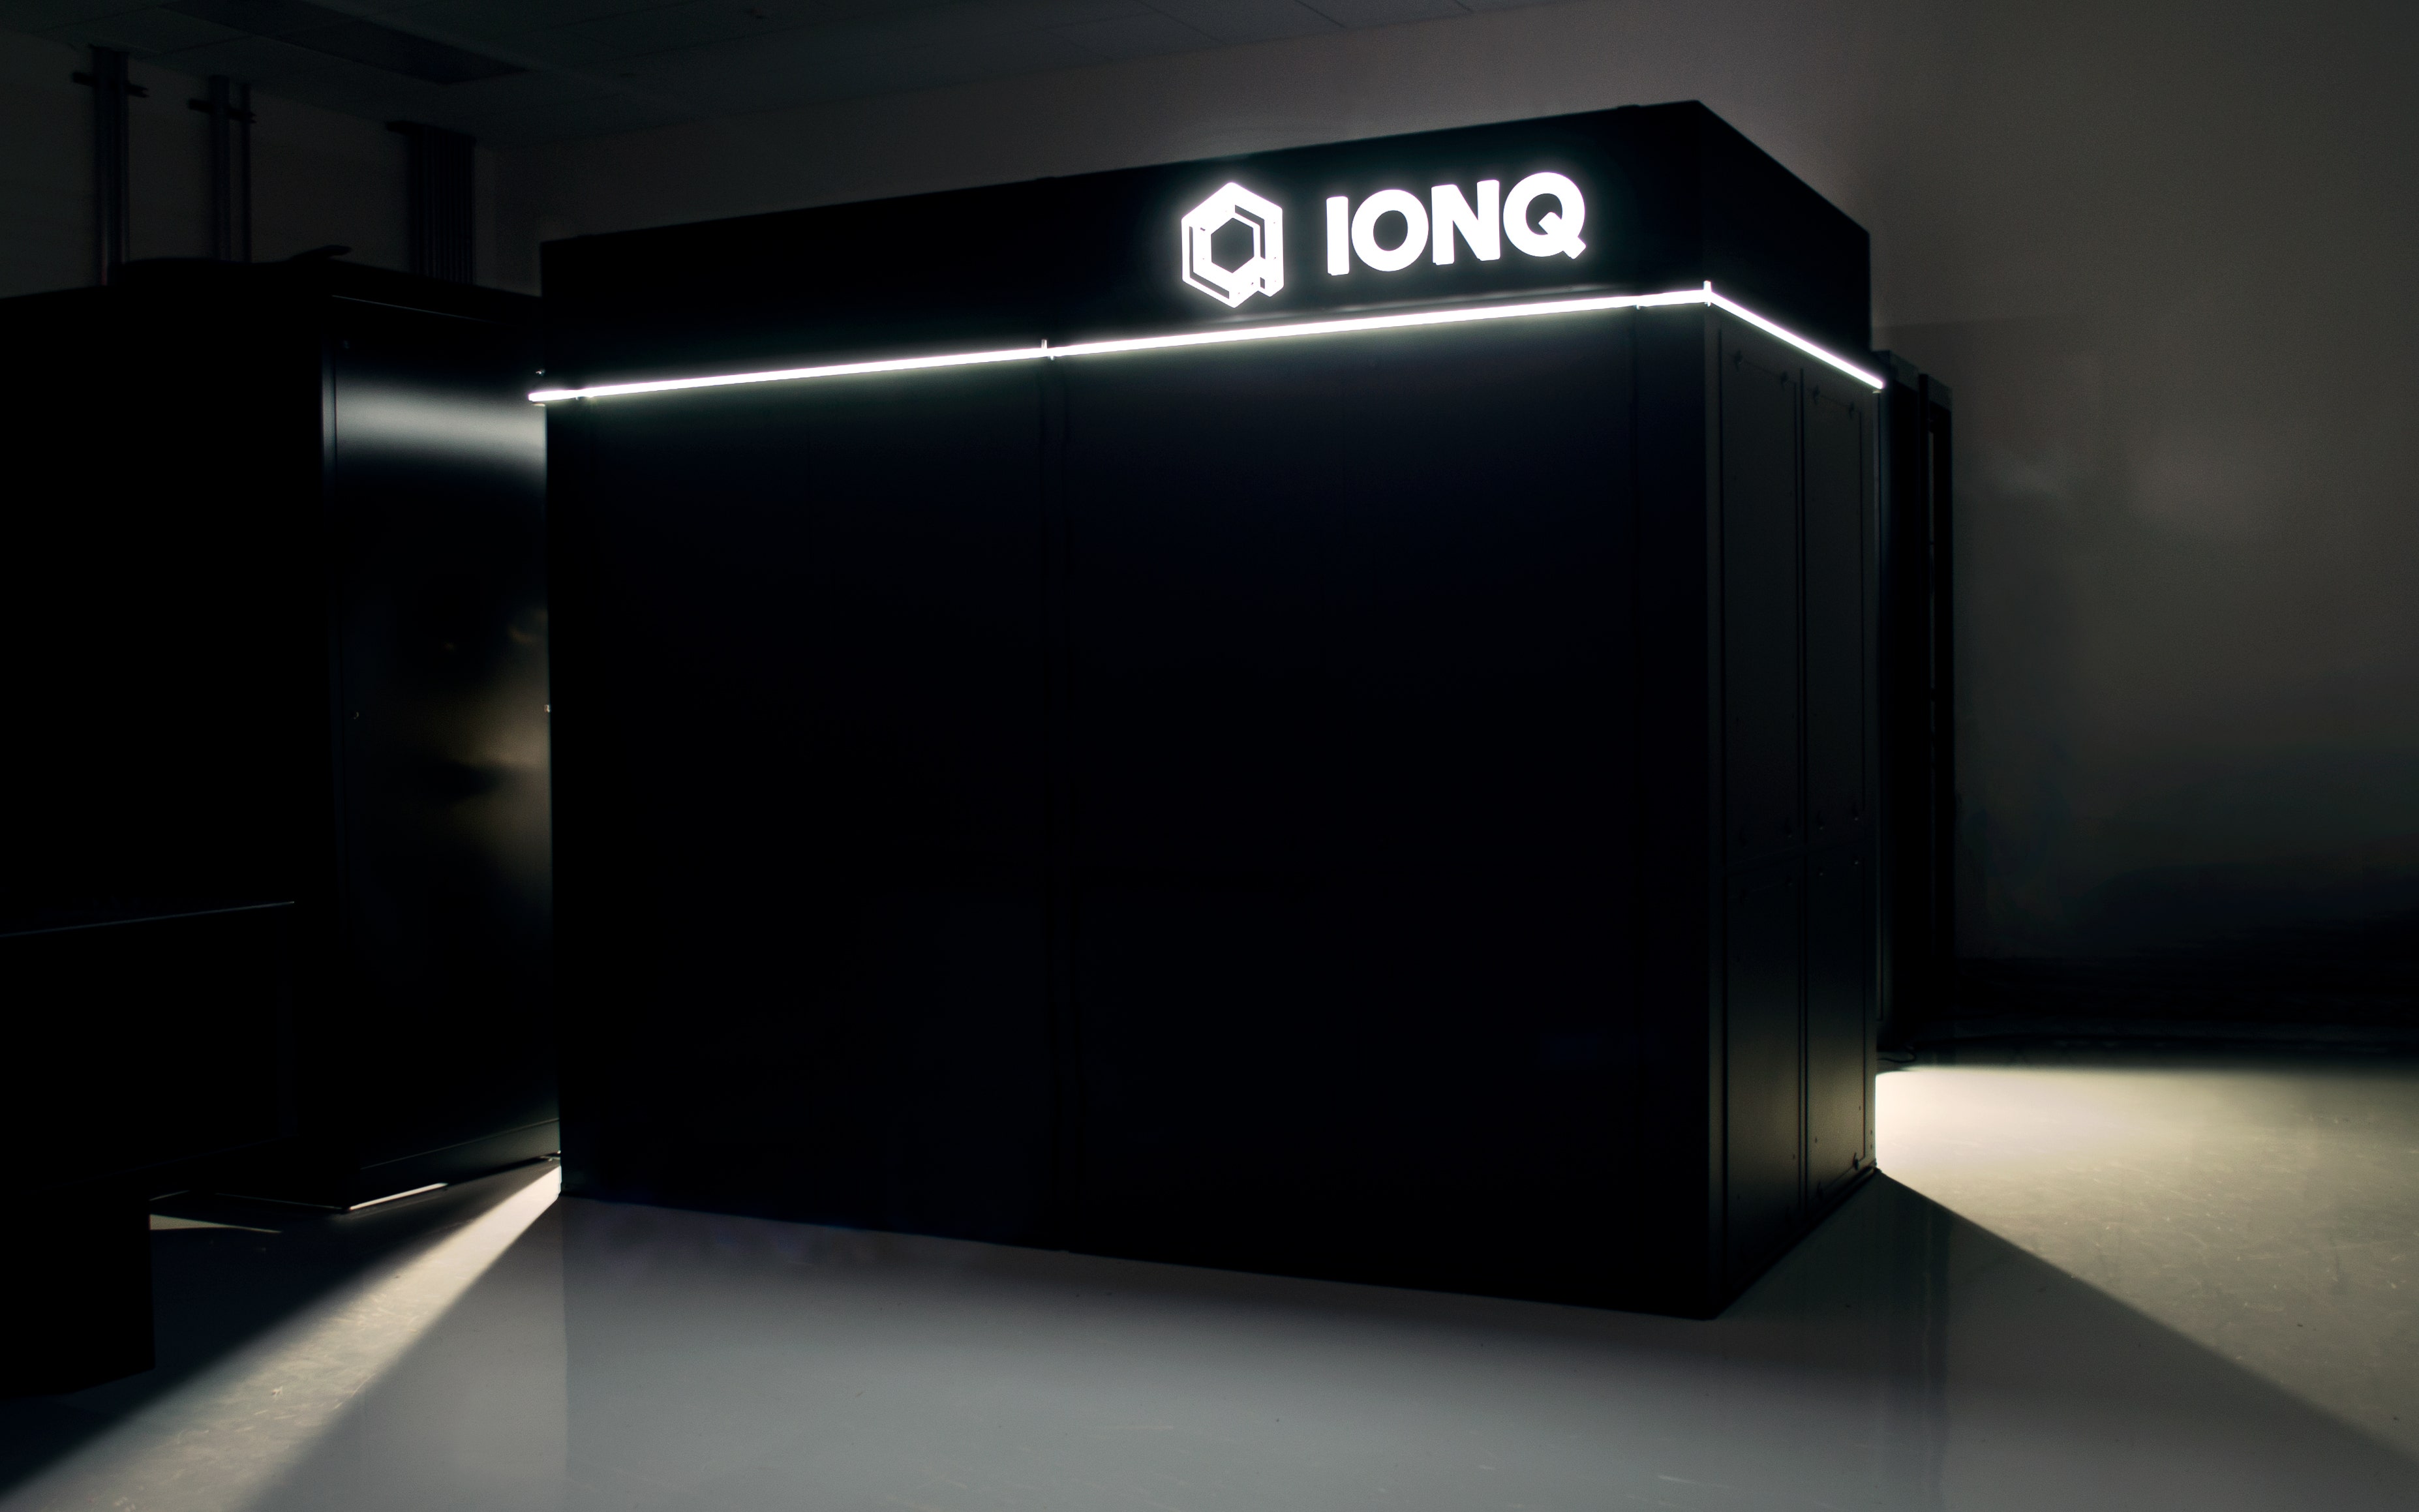 What's Going On With IonQ Stock After Hours?